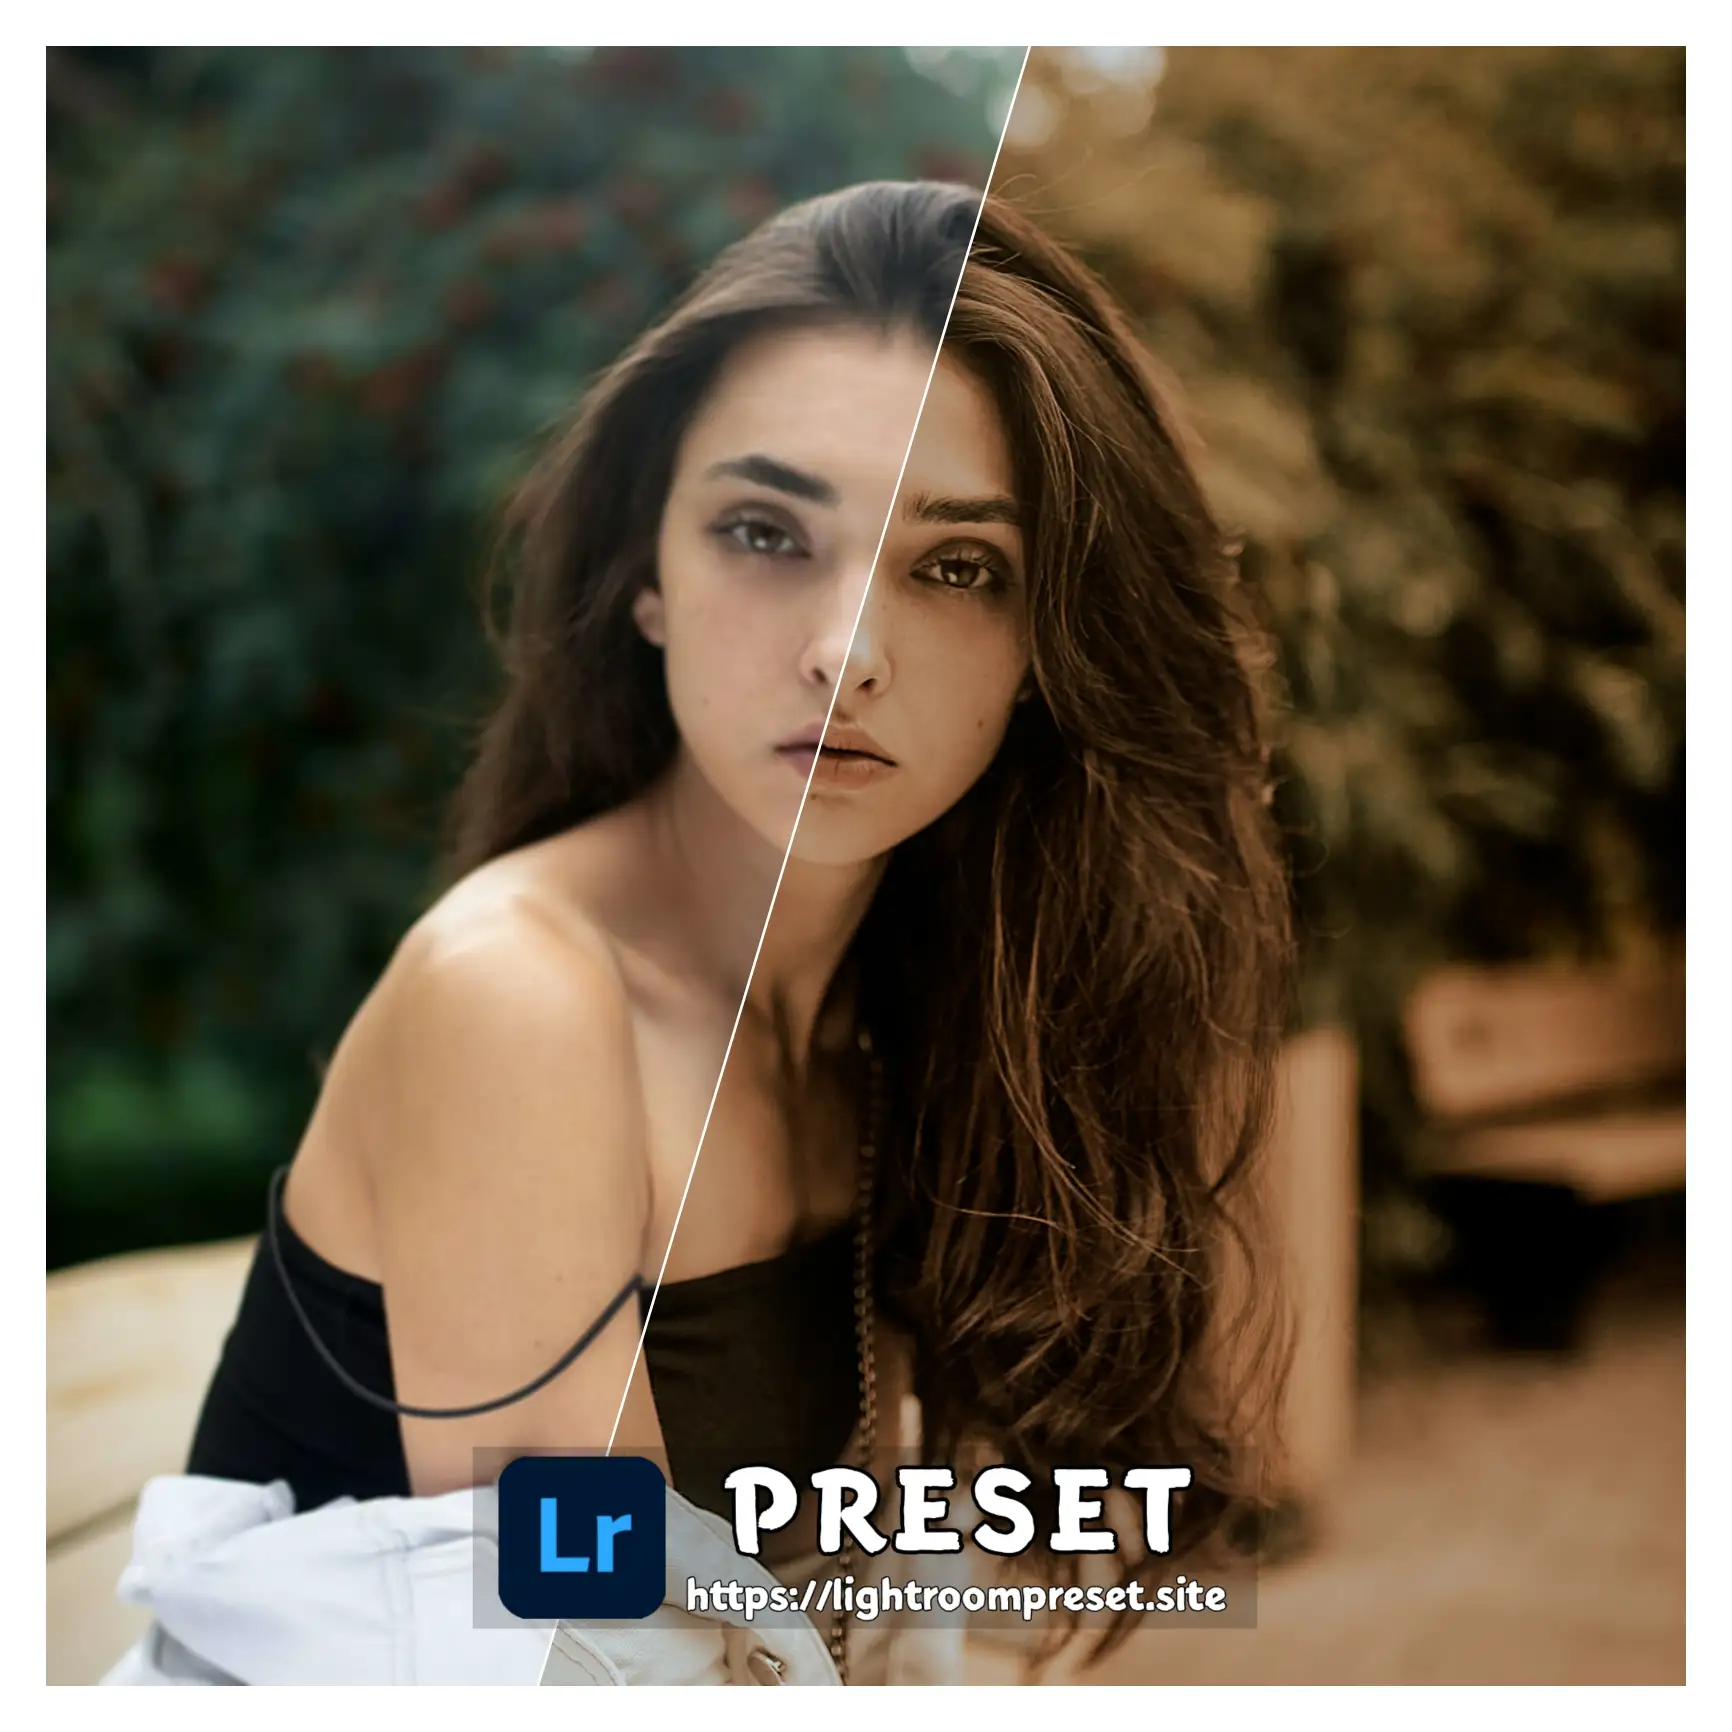 You are currently viewing Dark moody lightroom mobile presets free download